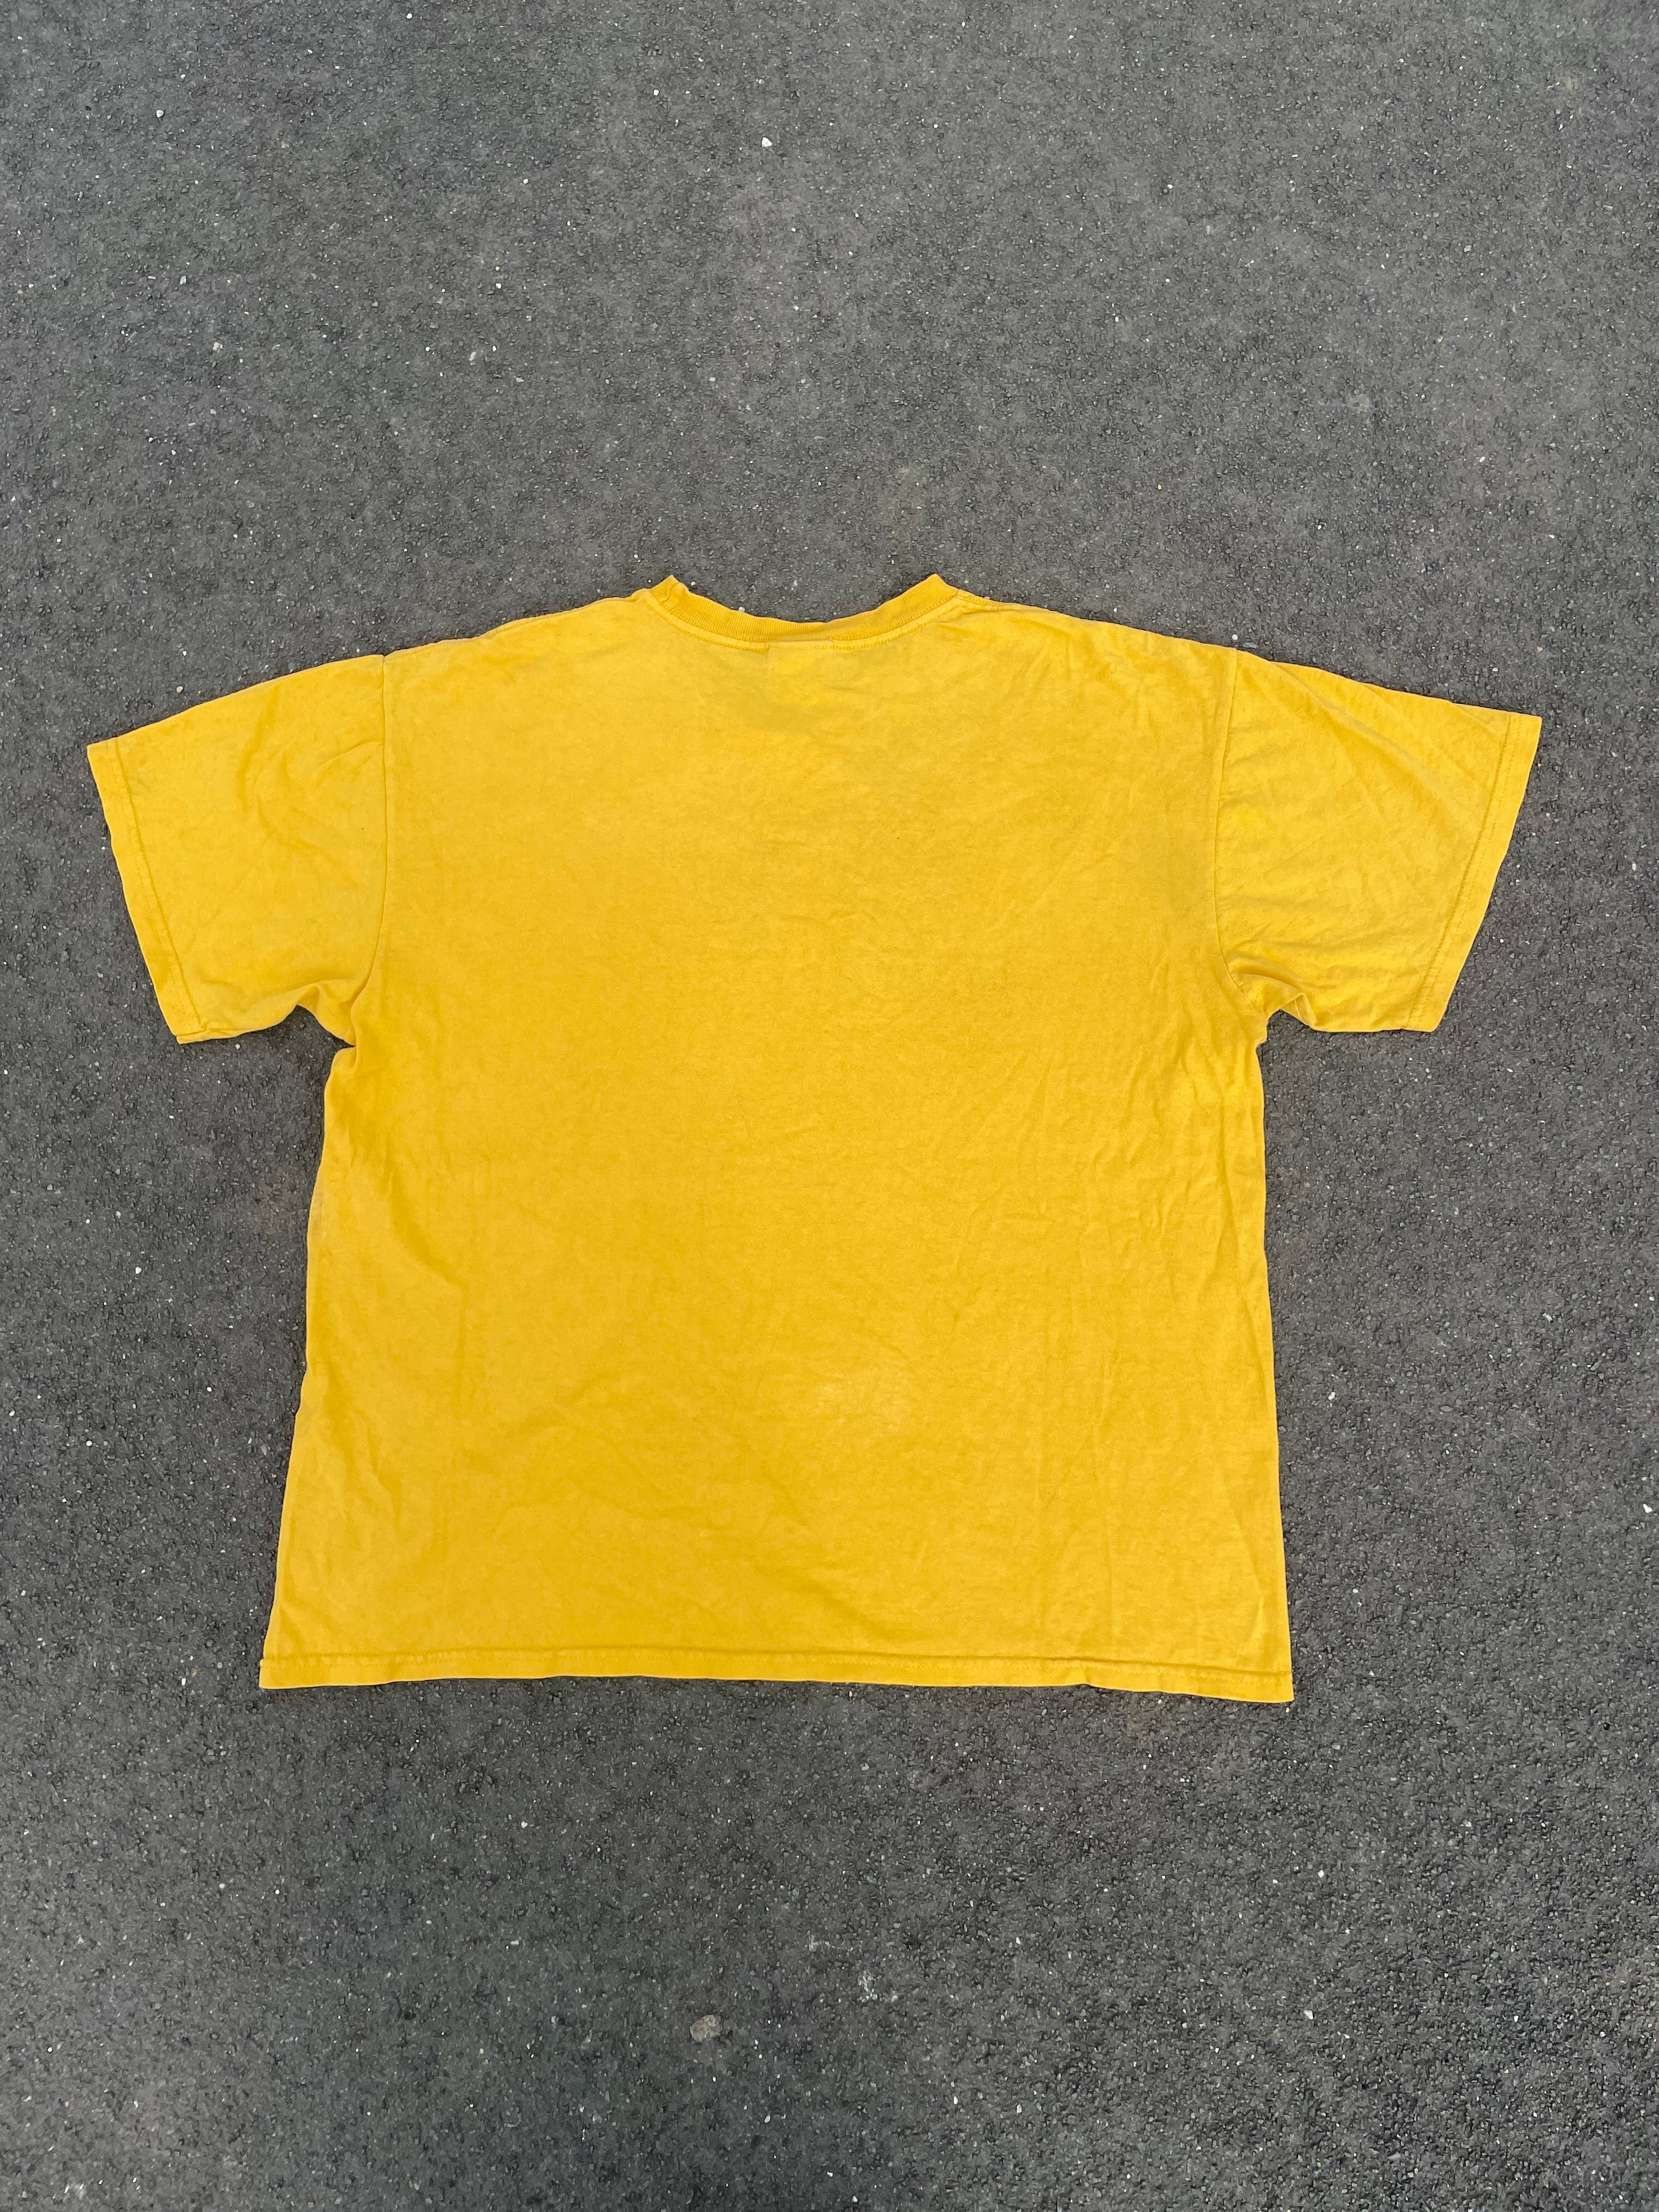 VINTAGE EARLY 2000 OVERSIZE NIKE T-SHIRT YELLOW COLORWAY (L)